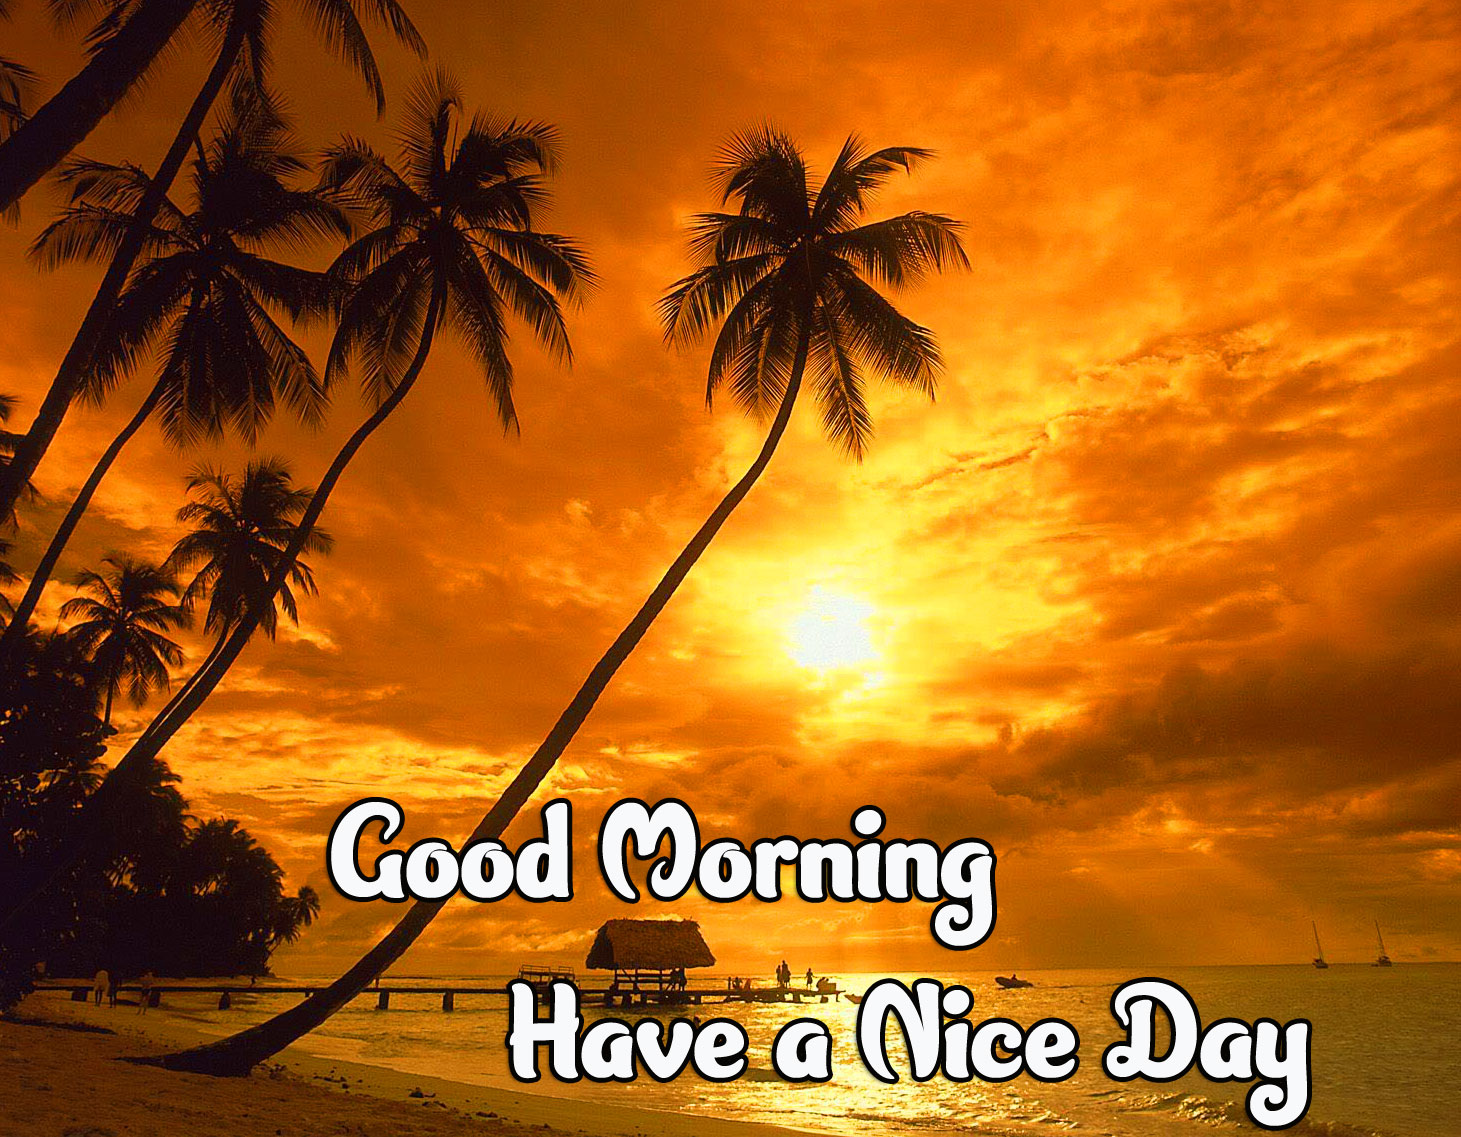 Good Morning Images Pics Photo Download 